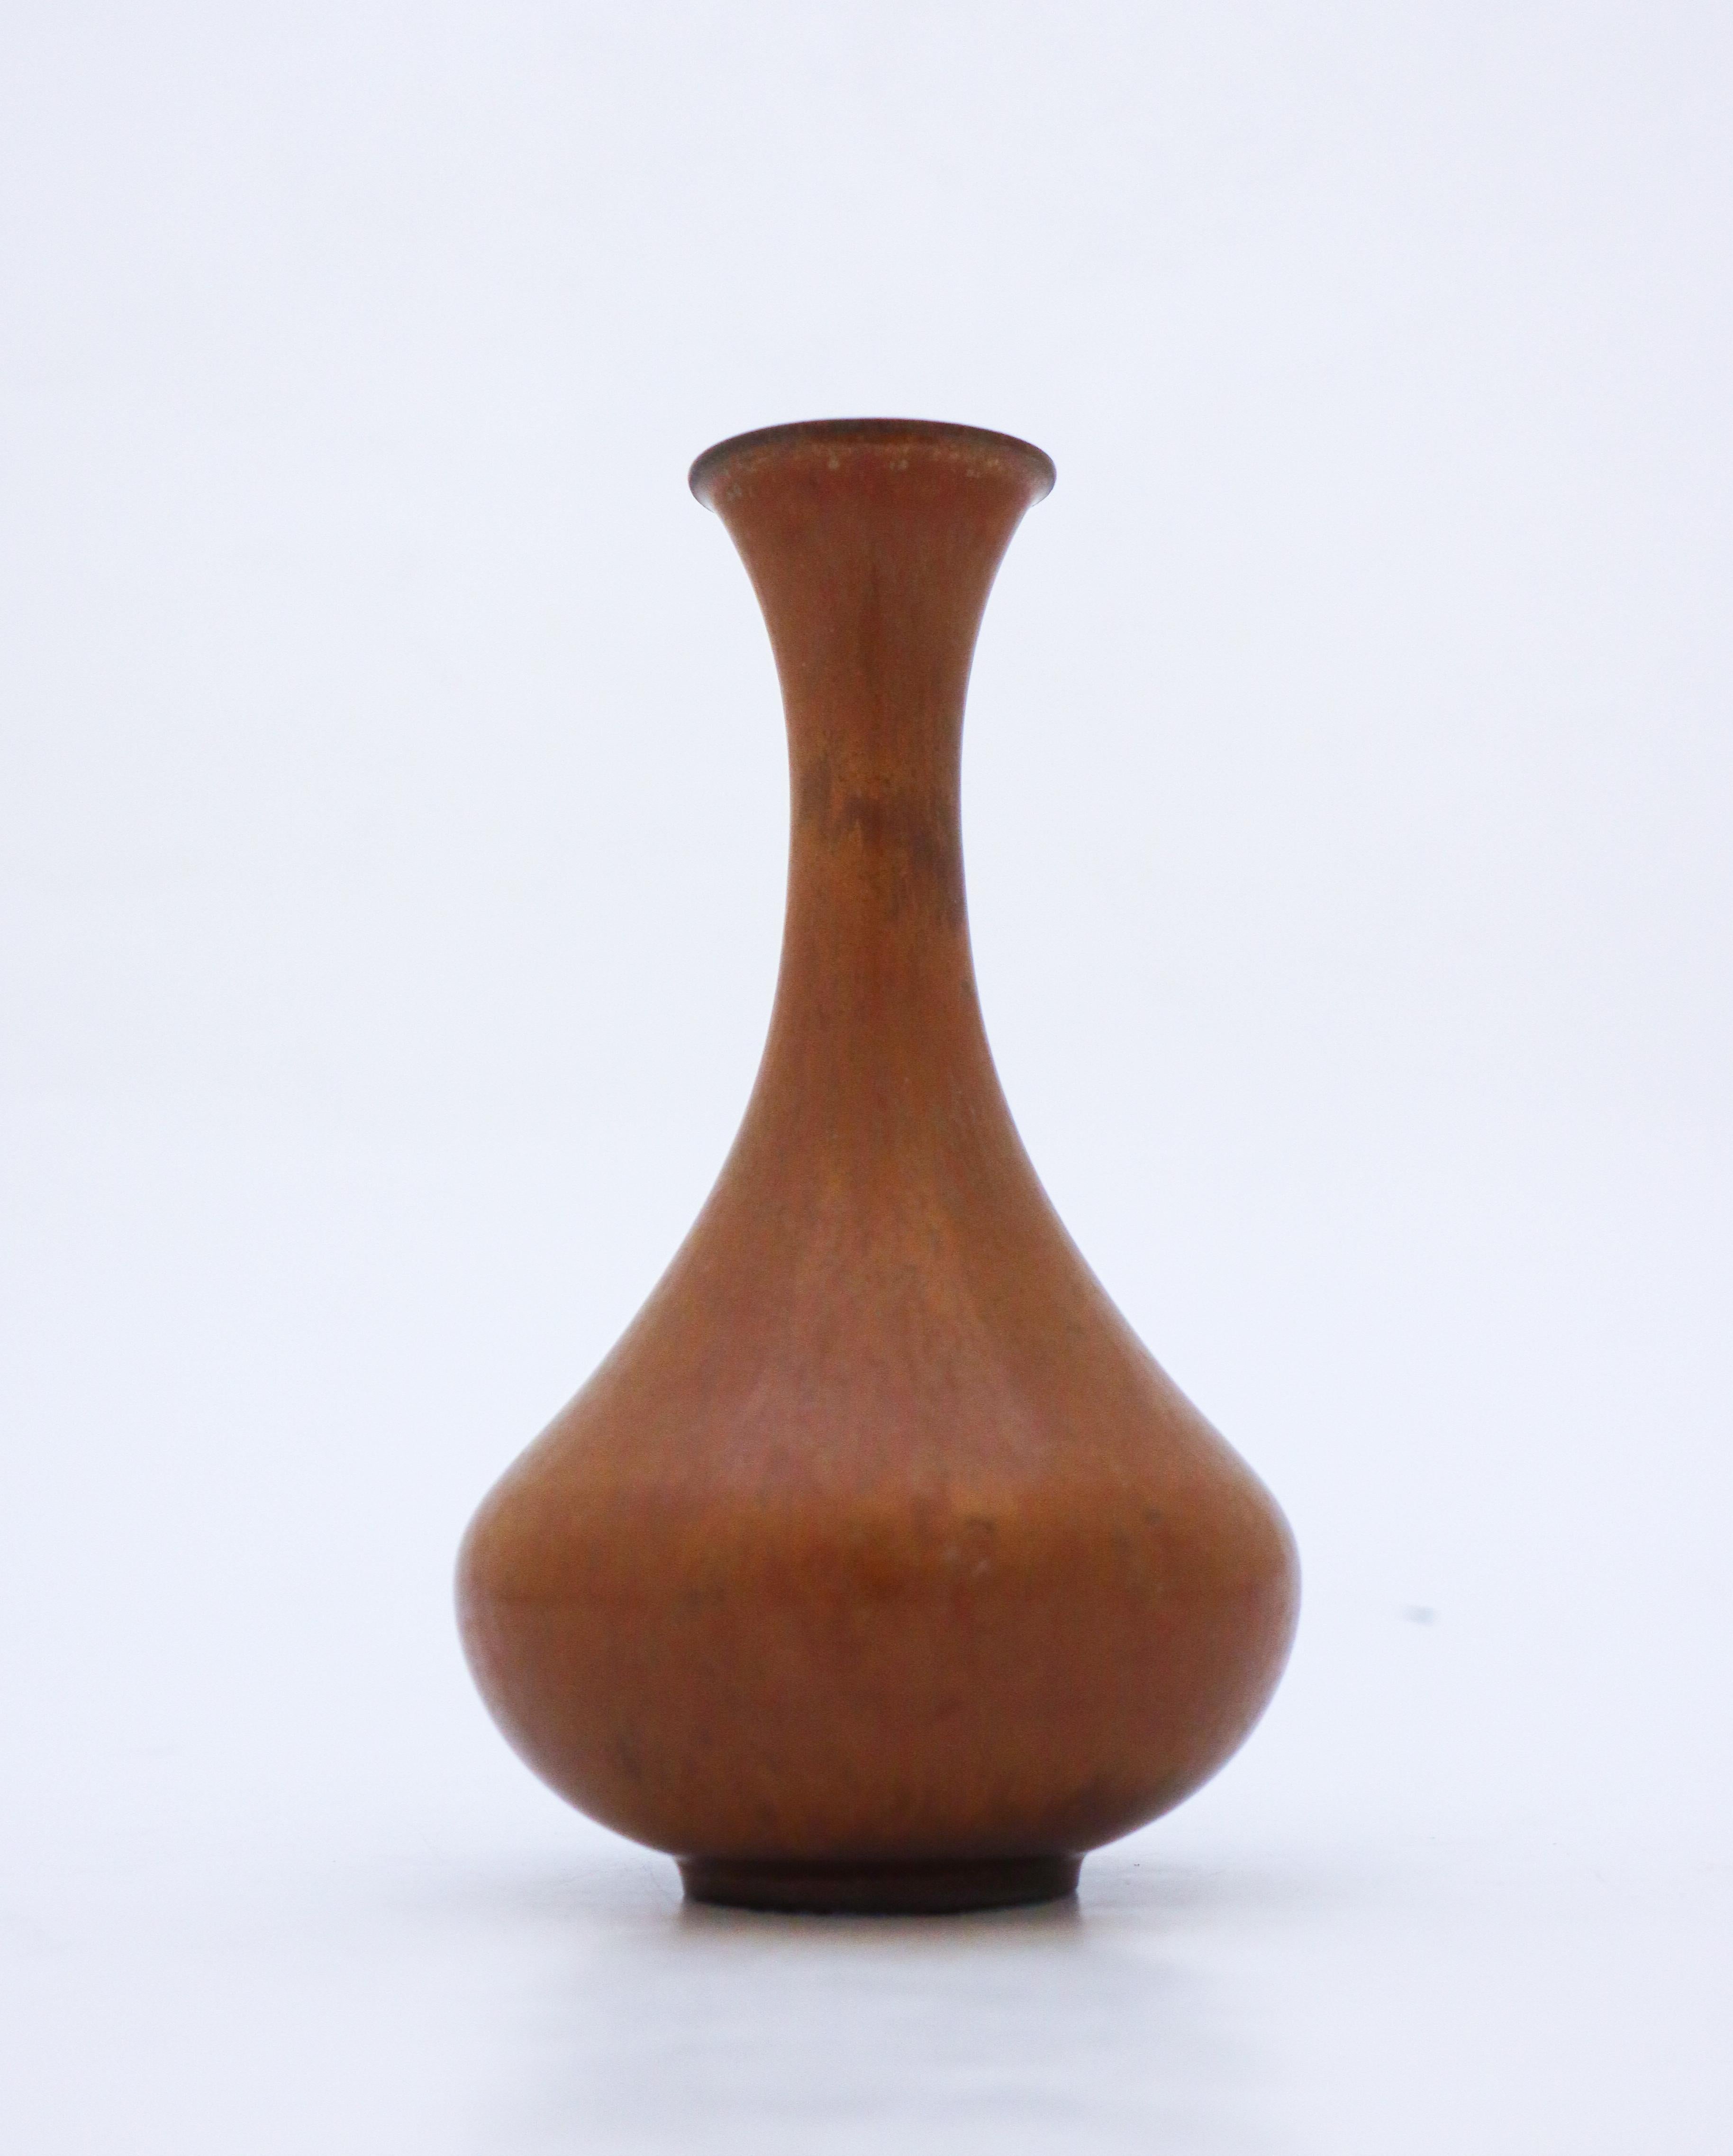 A brown vase designed by Gunnar Nylund at Rörstrand, it´s 16.5 cm (6.6) high. It´s in mint condition and marked as 1:st quality. 

Gunnar Nylund was born in Paris 1904 with parents who worked as sculptors and designer so he really soon started hos